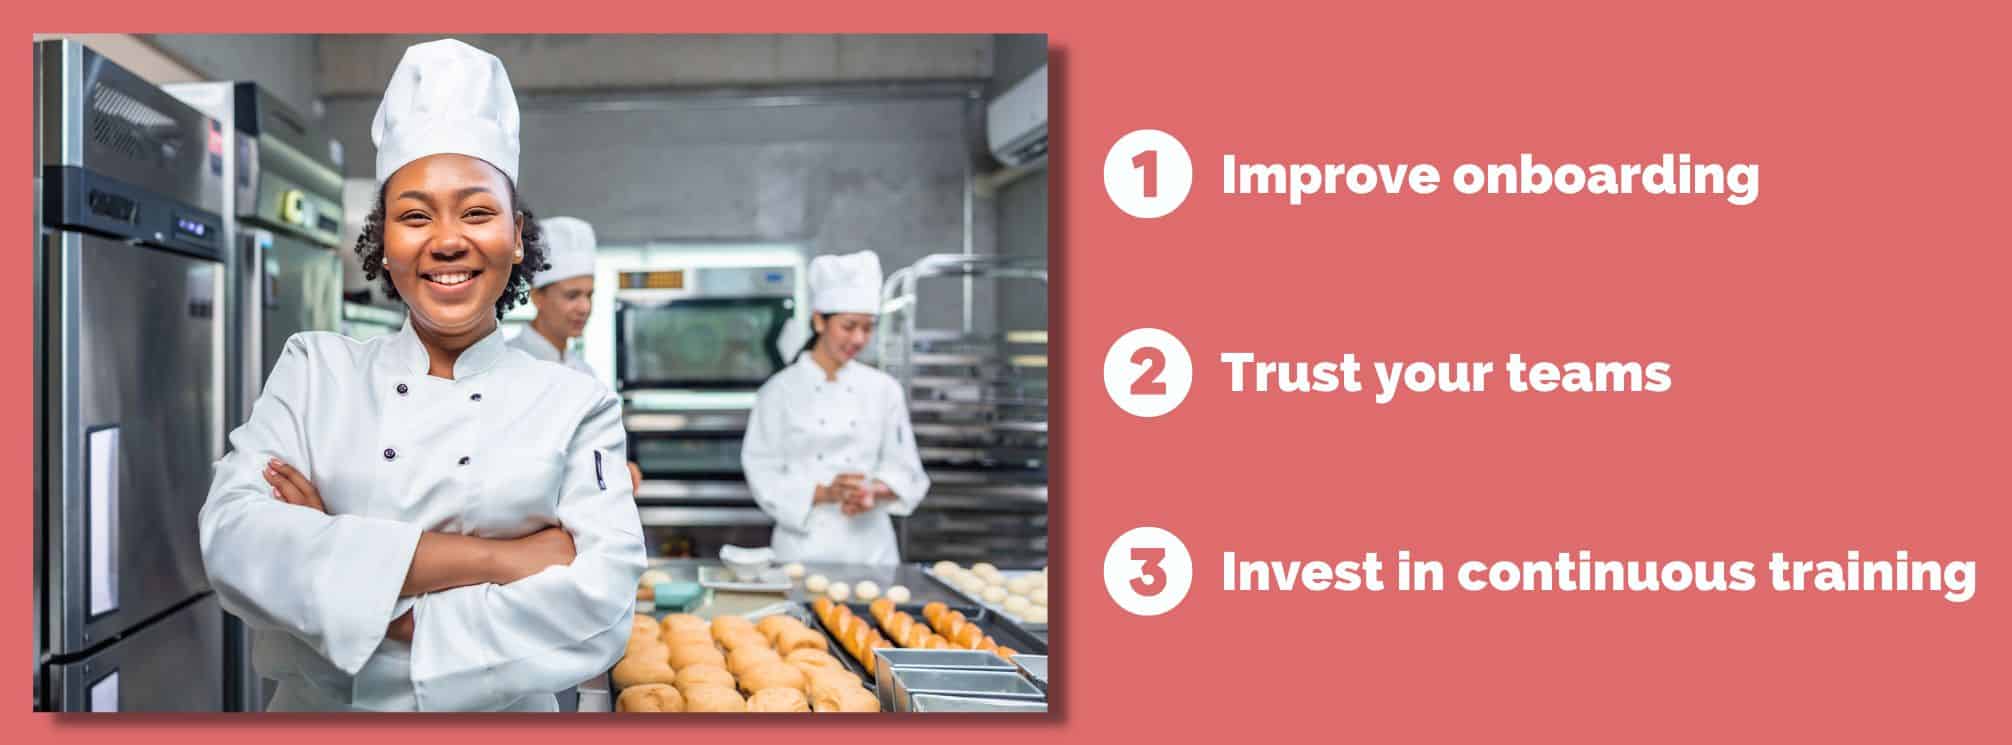 ways to improve employee engagement in hospitality: 1 improve onboarding, 2 trust your teams, 3 invest in continuous training